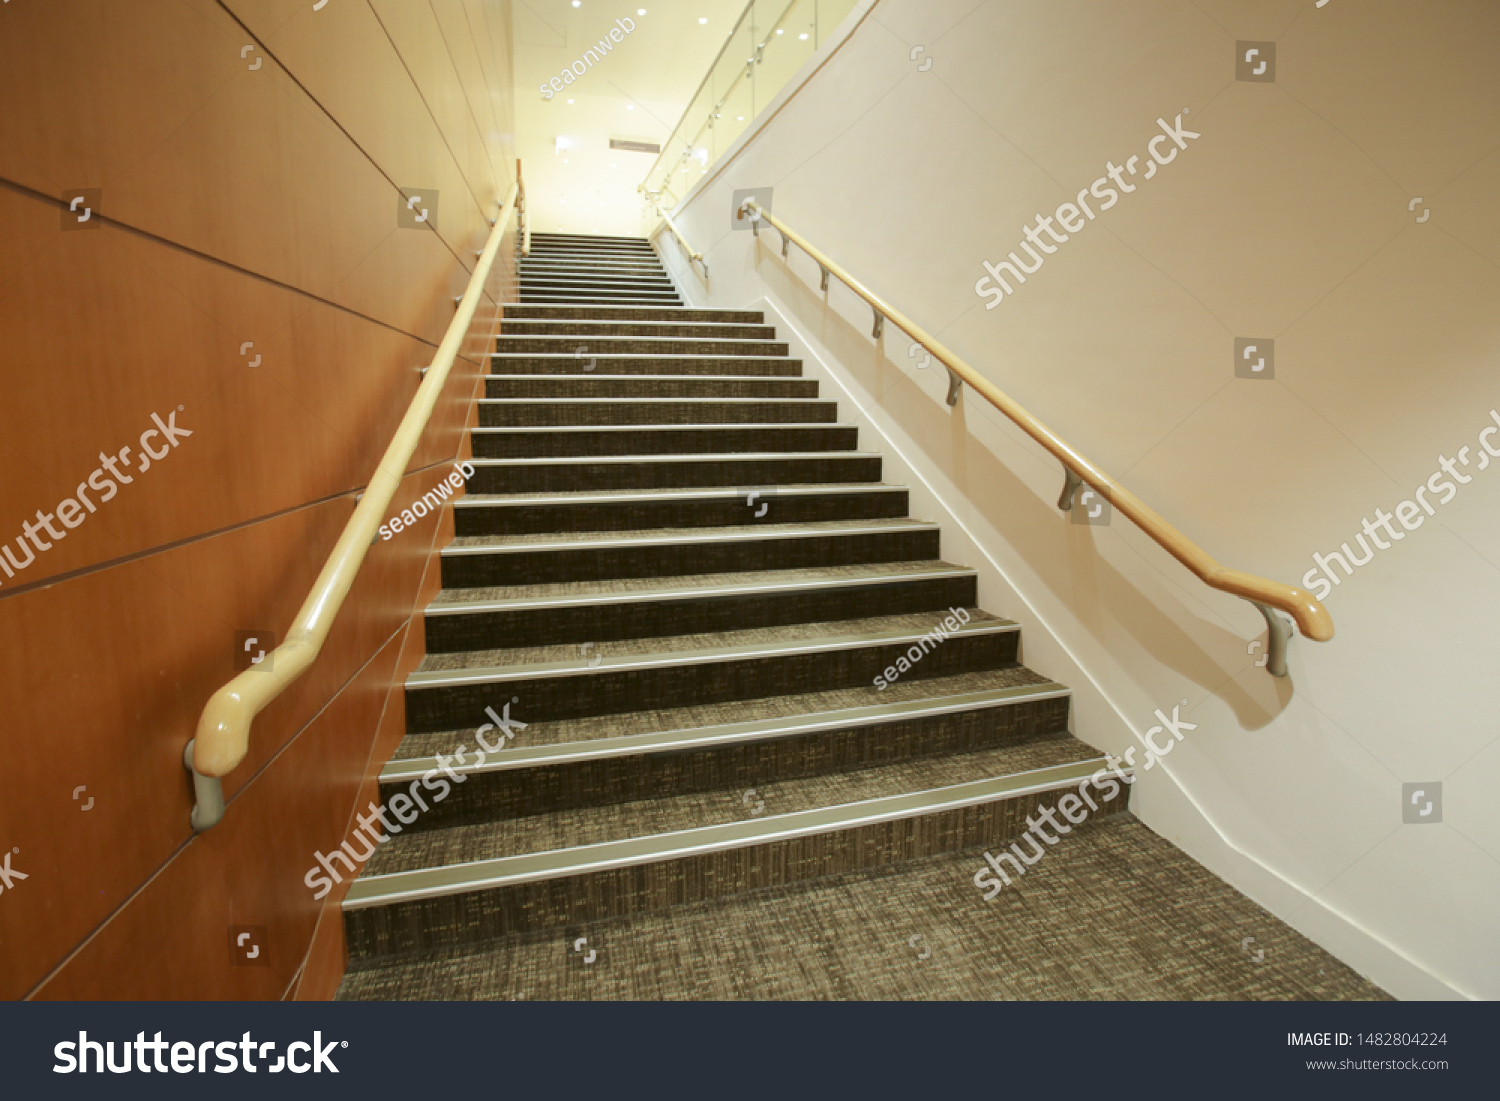 Empty stair with steel wood - Indoor modern architecture #1482804224